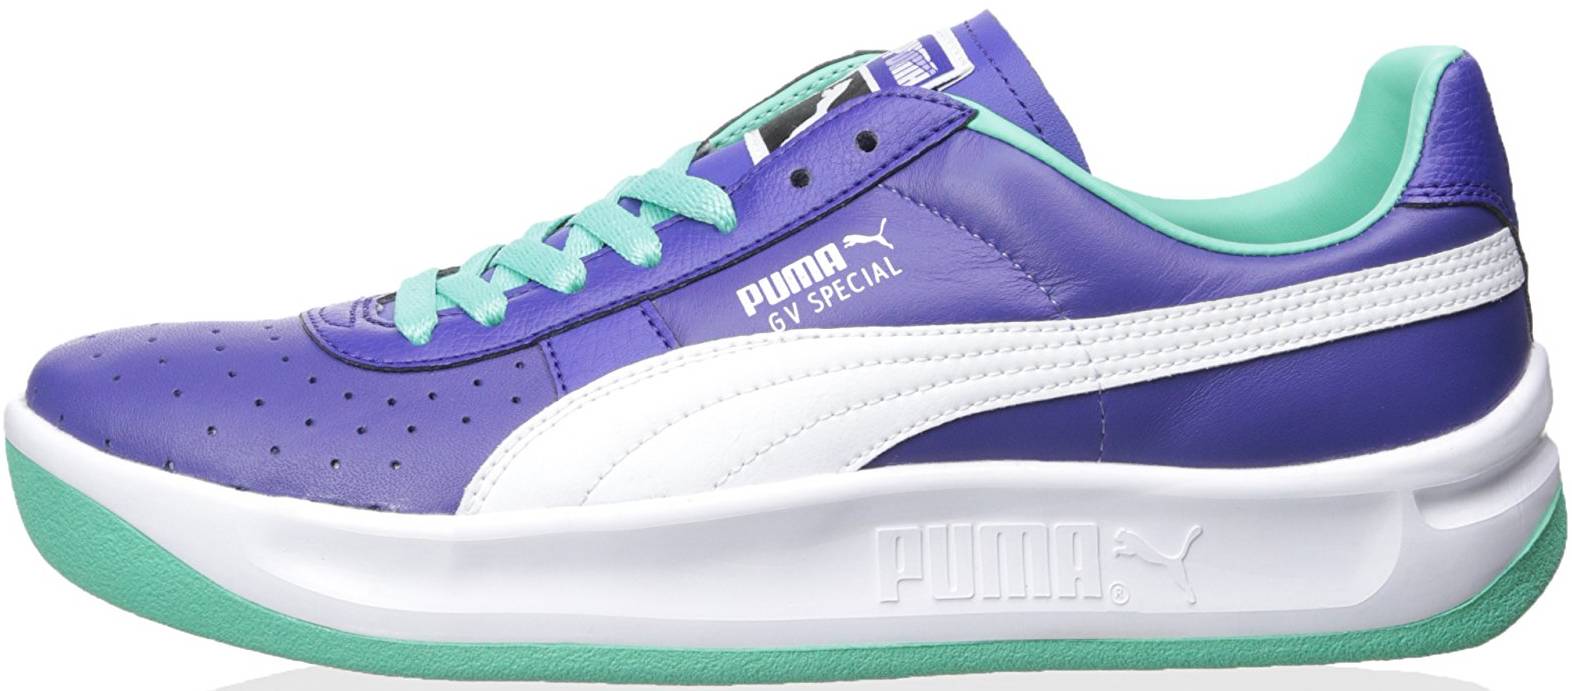 Only £58 + Review of Puma GV Special 